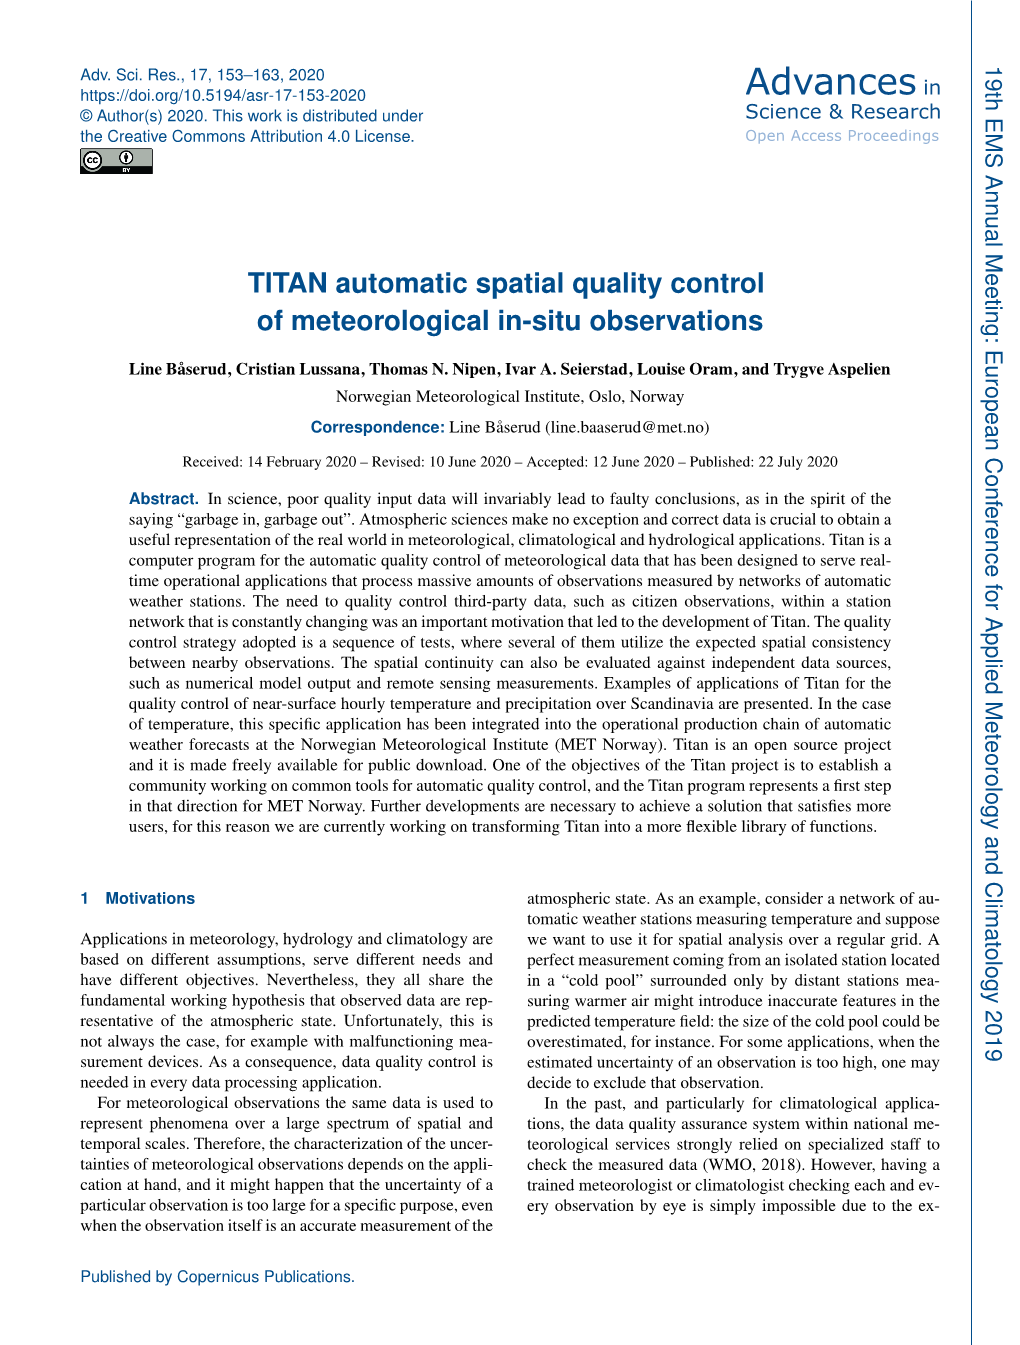 TITAN Automatic Spatial Quality Control of Meteorological In-Situ Observations